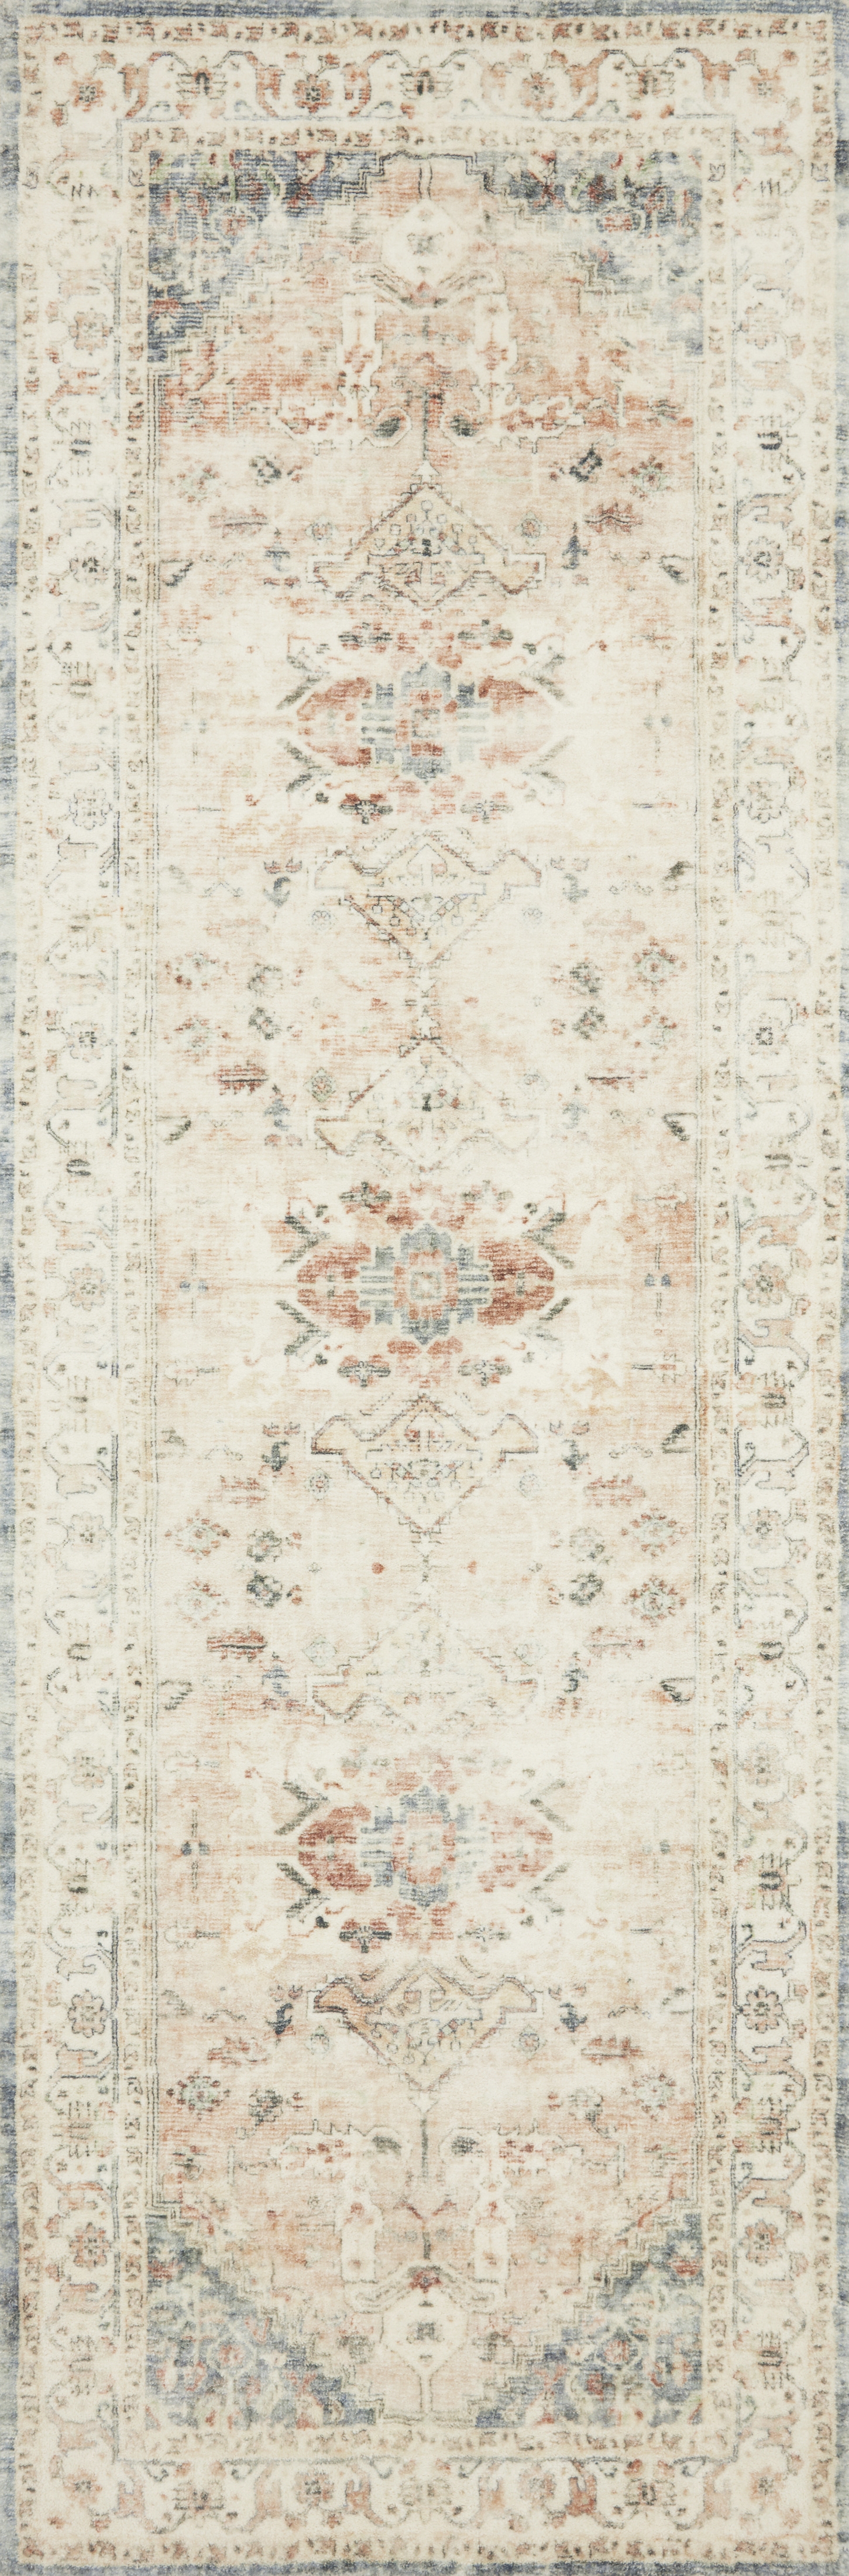 Rosette ROS-06 Clay / Ivory 7'-6" x 9'-6" - Image 2